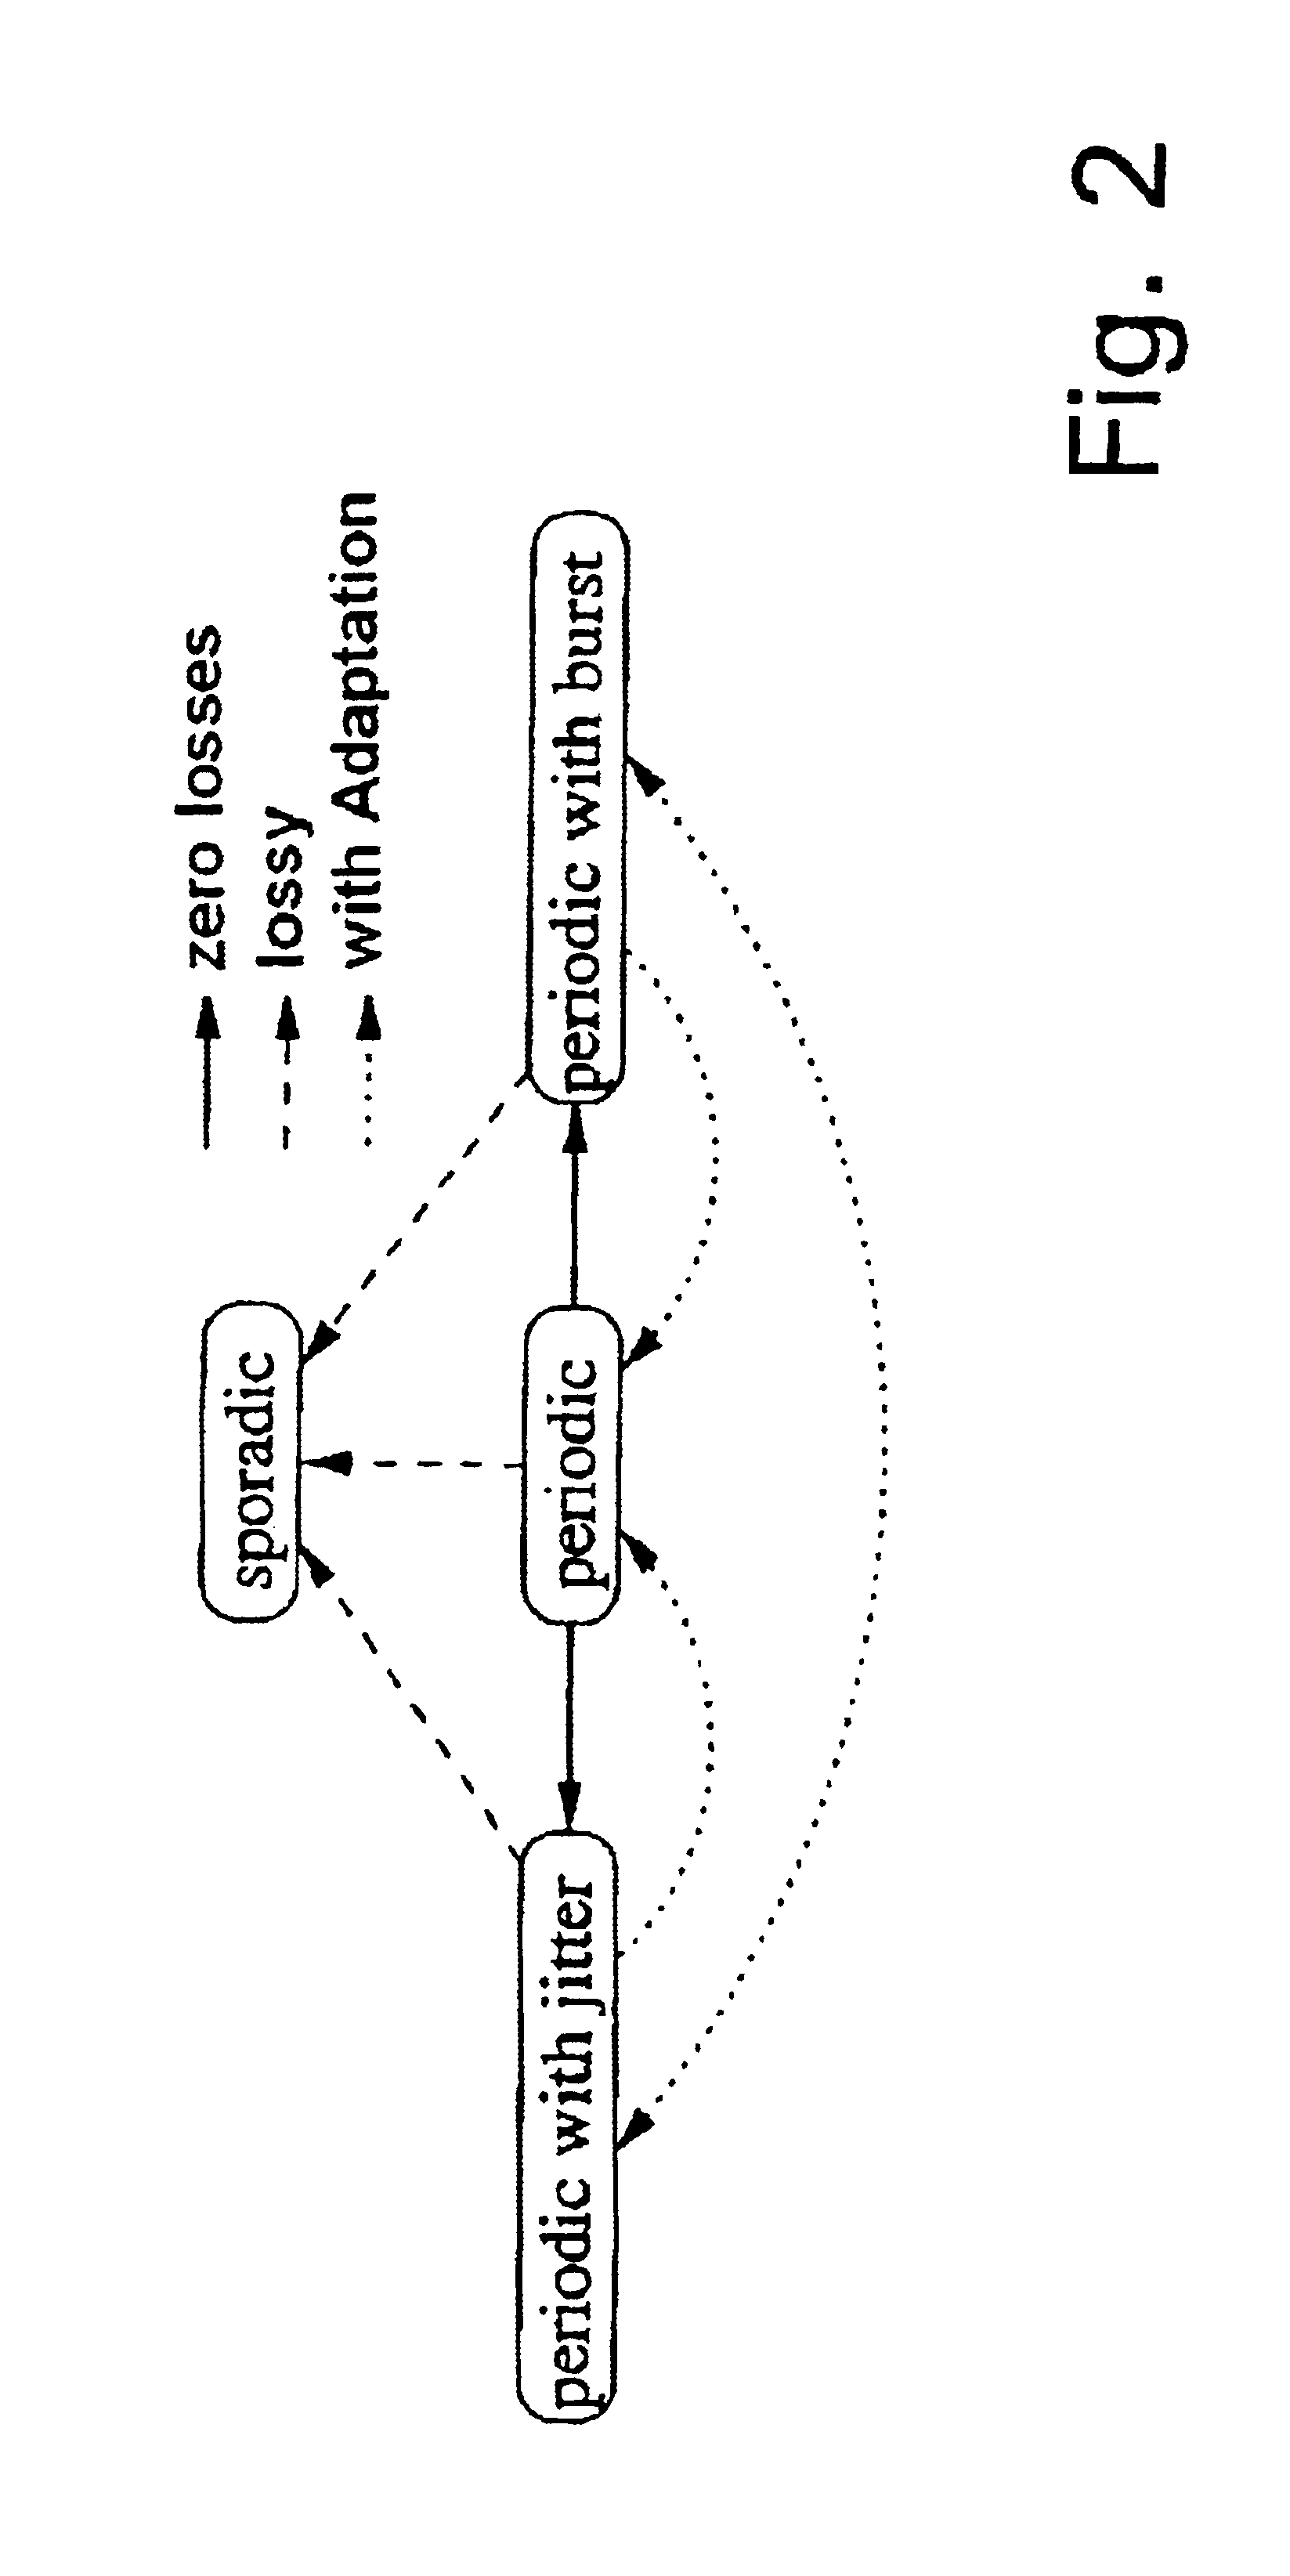 Method for analysis of the time response of complex distributed systems